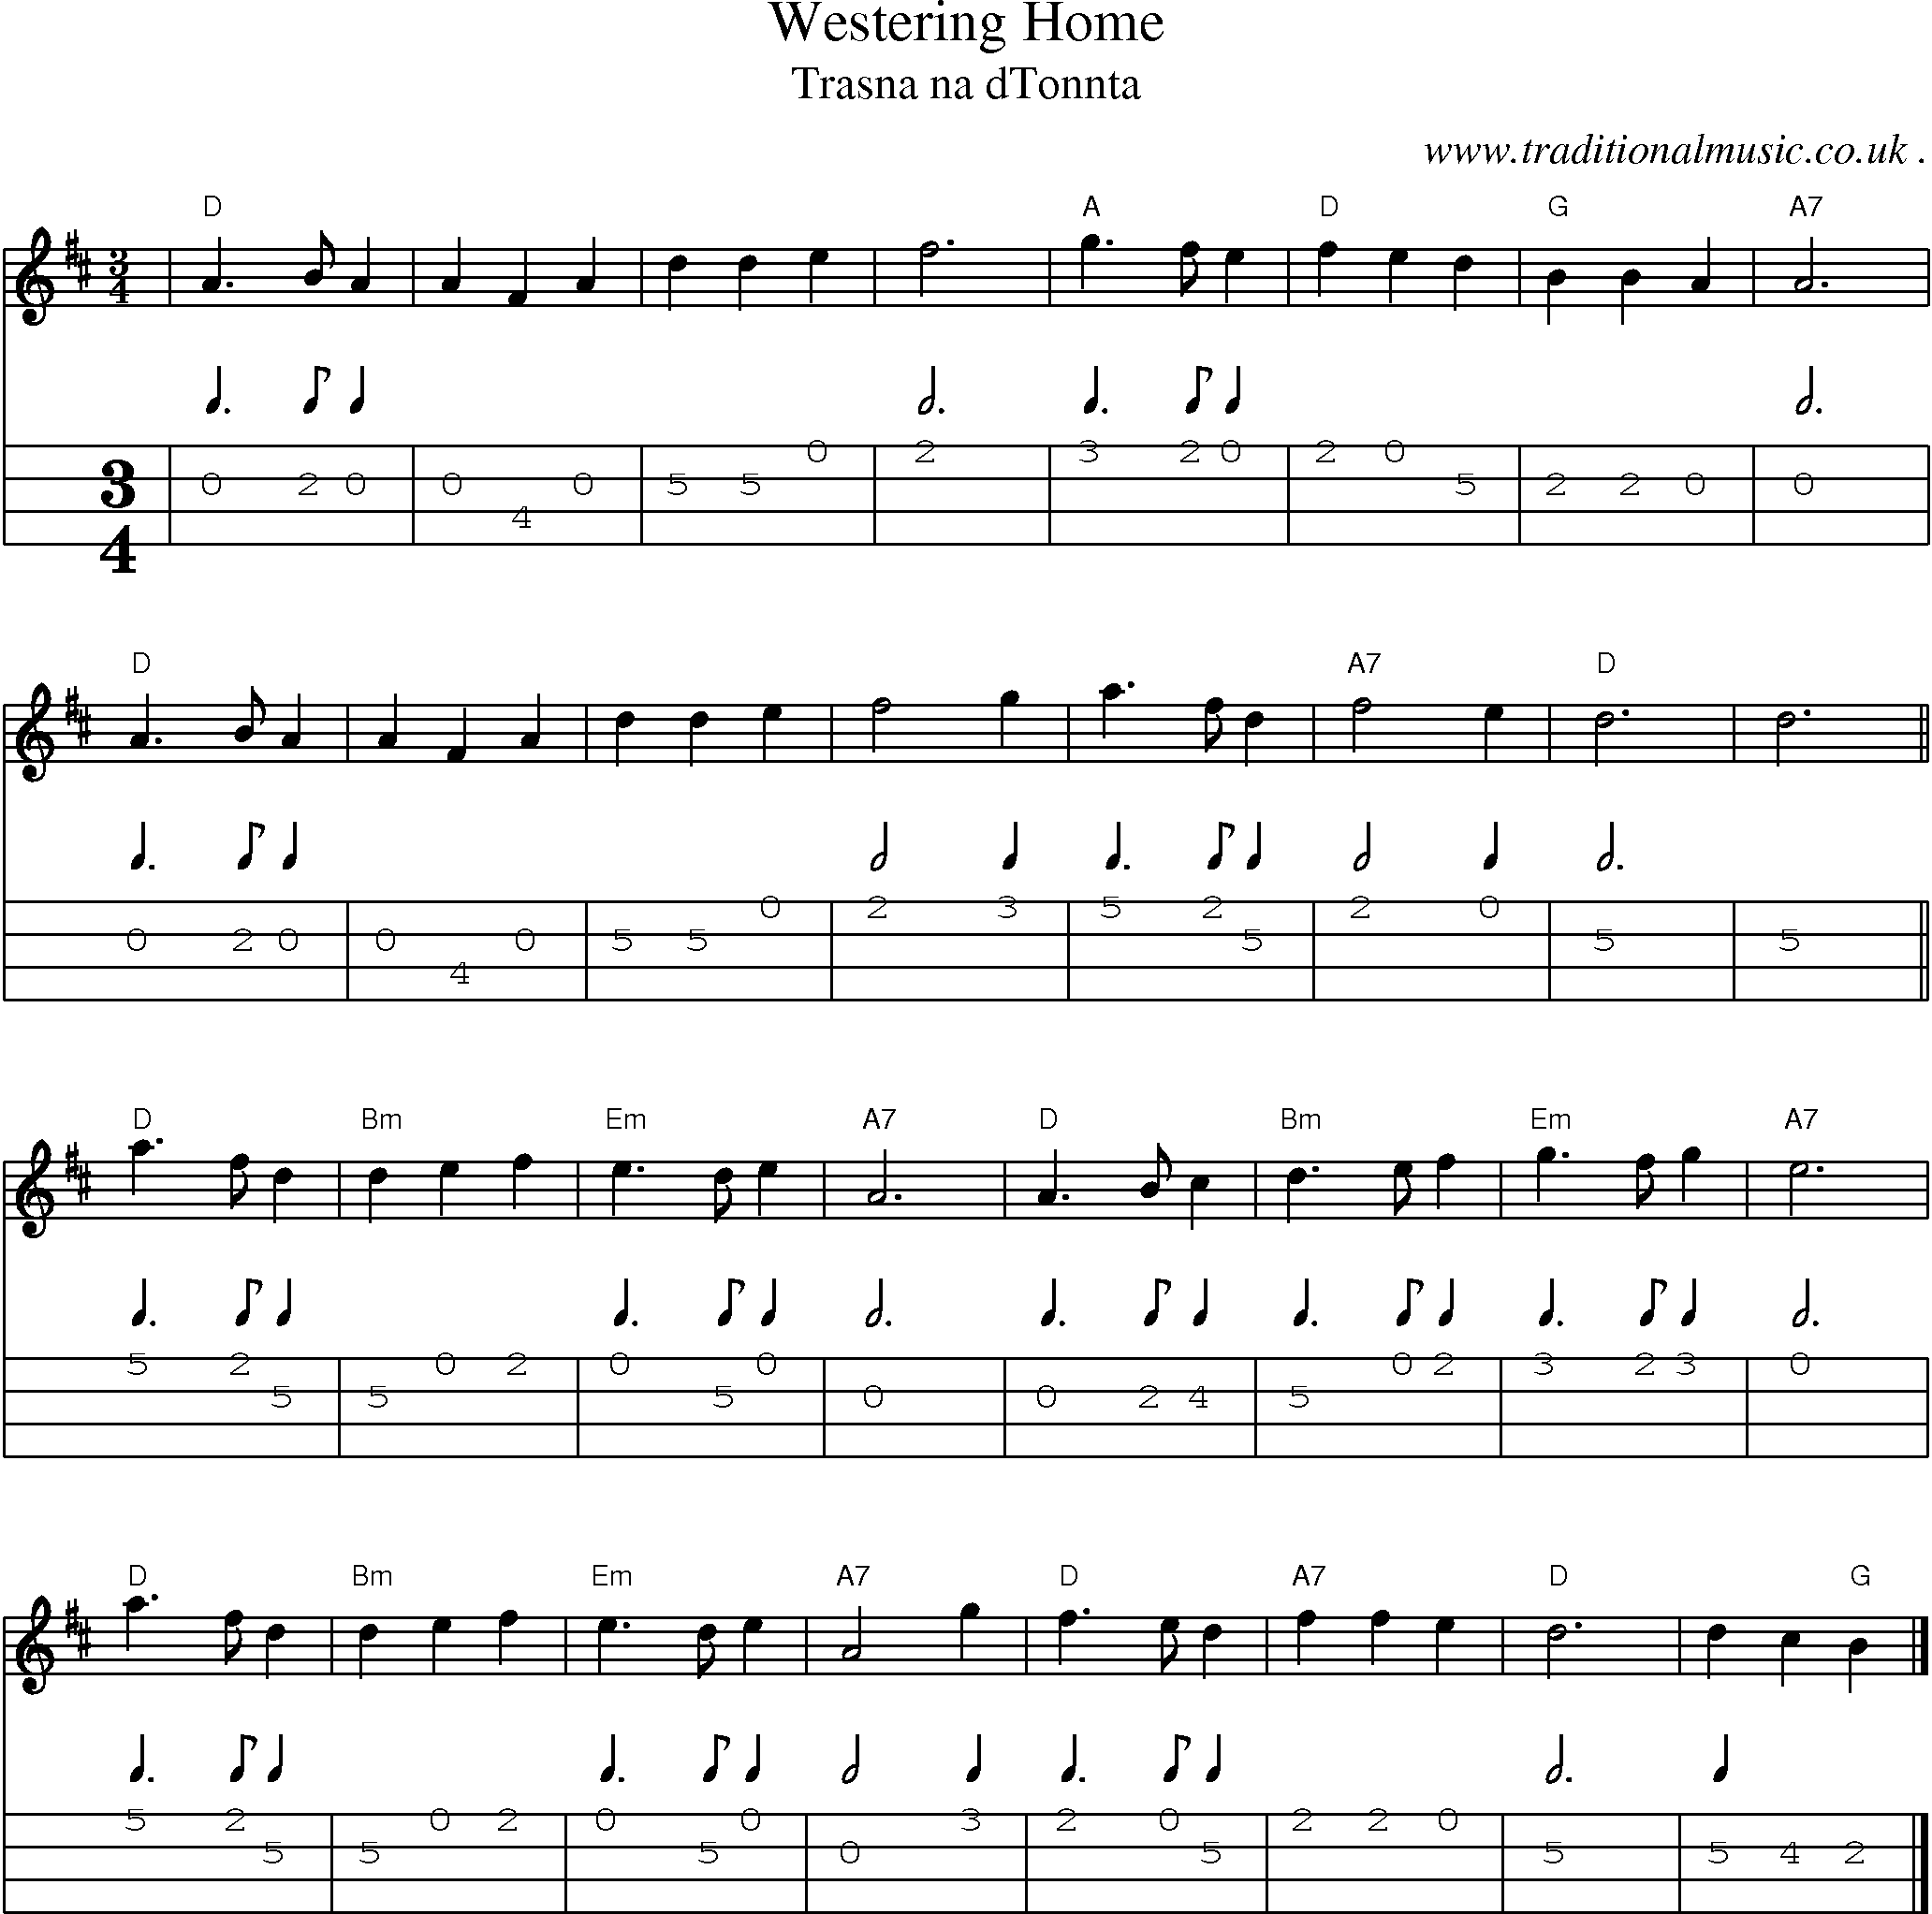 Music Score and Guitar Tabs for Westering Home